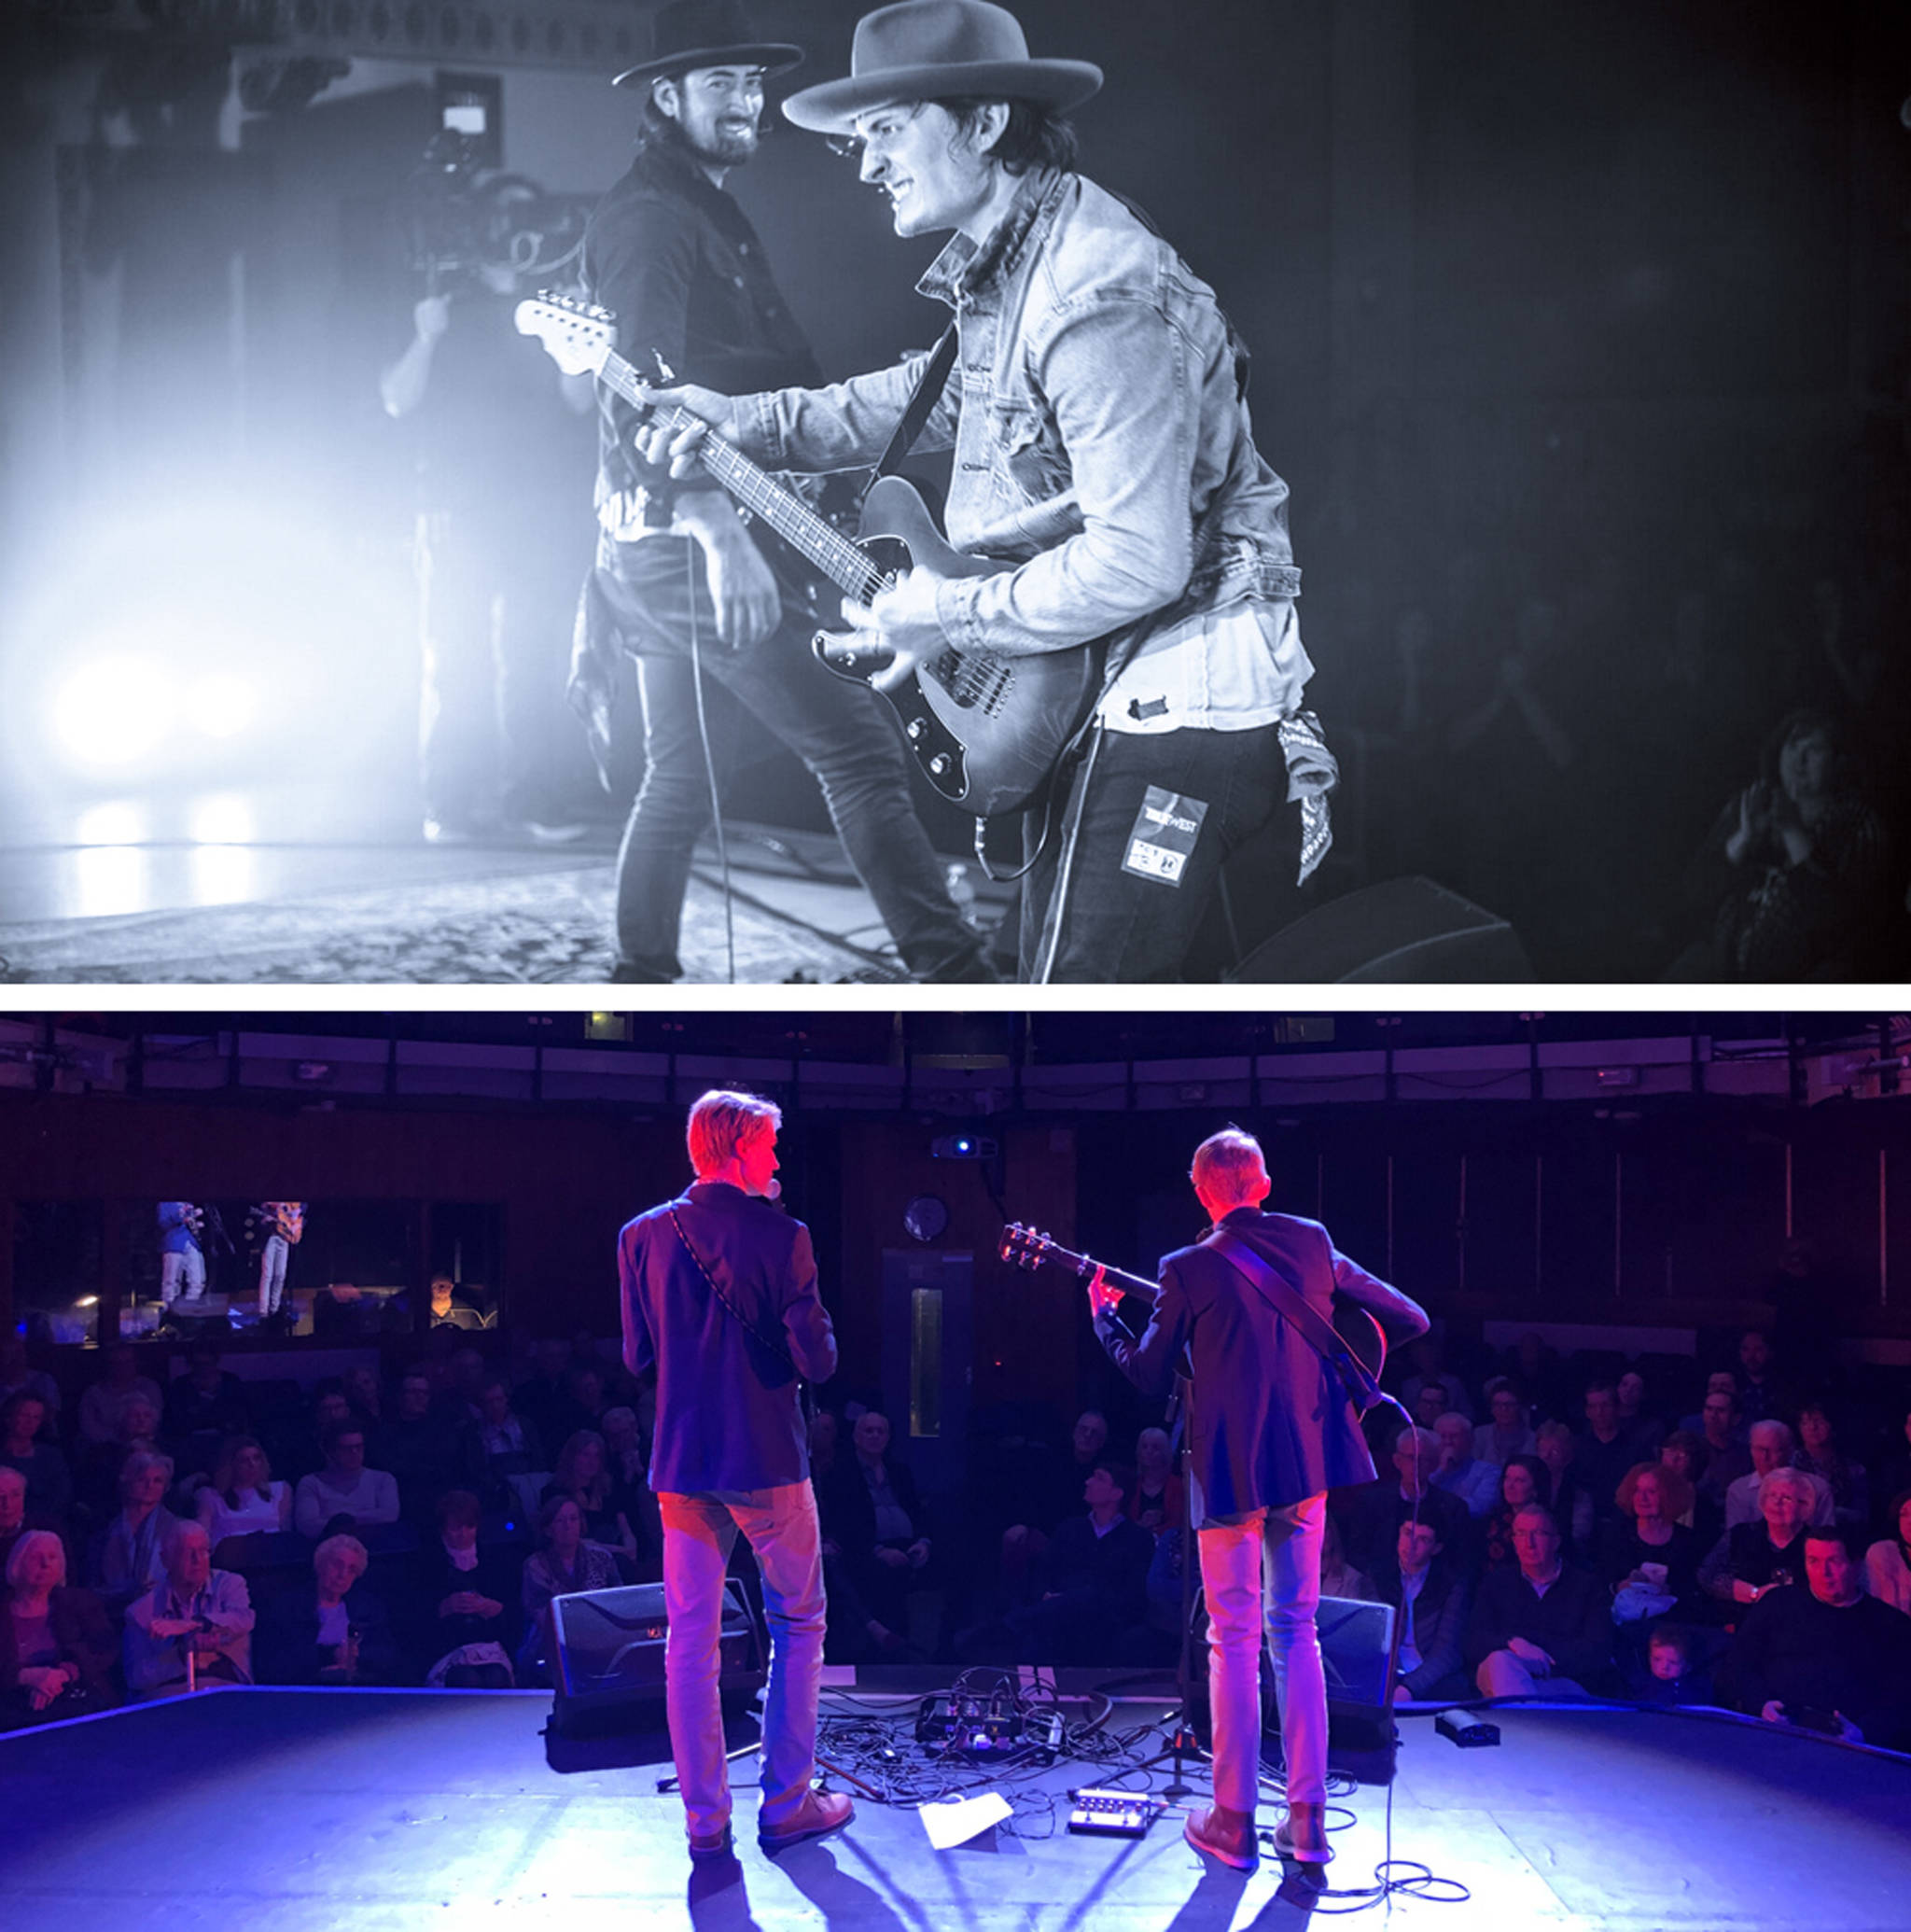 The Talbott Brothers (top) and Brograss (bottom) will be performing live at Eastsound’s Village Green at 6 p.m. on Saturday, July 24. Visit www.OrcasCenter.org for more information.